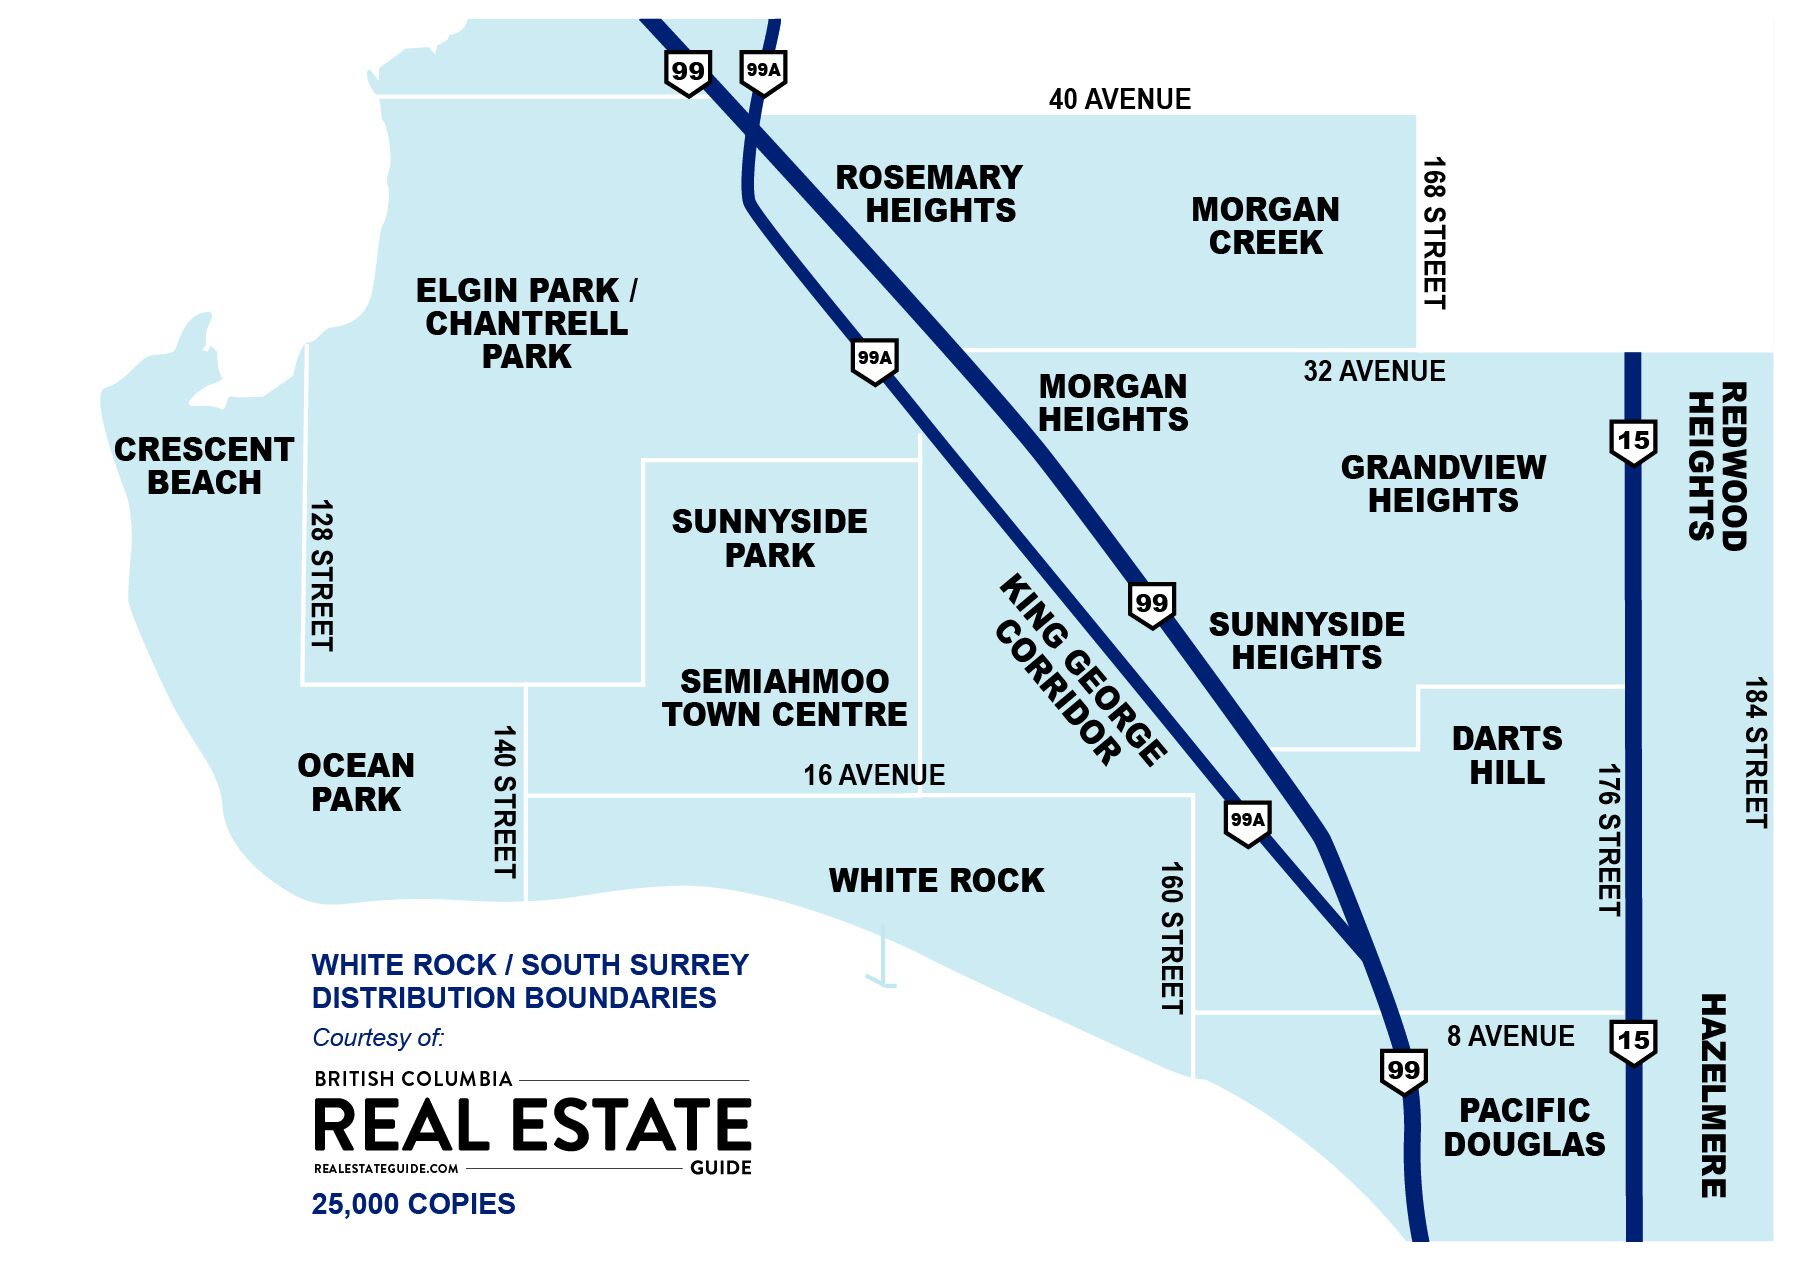 White Rock / South Surrey Real Estate Guide Map